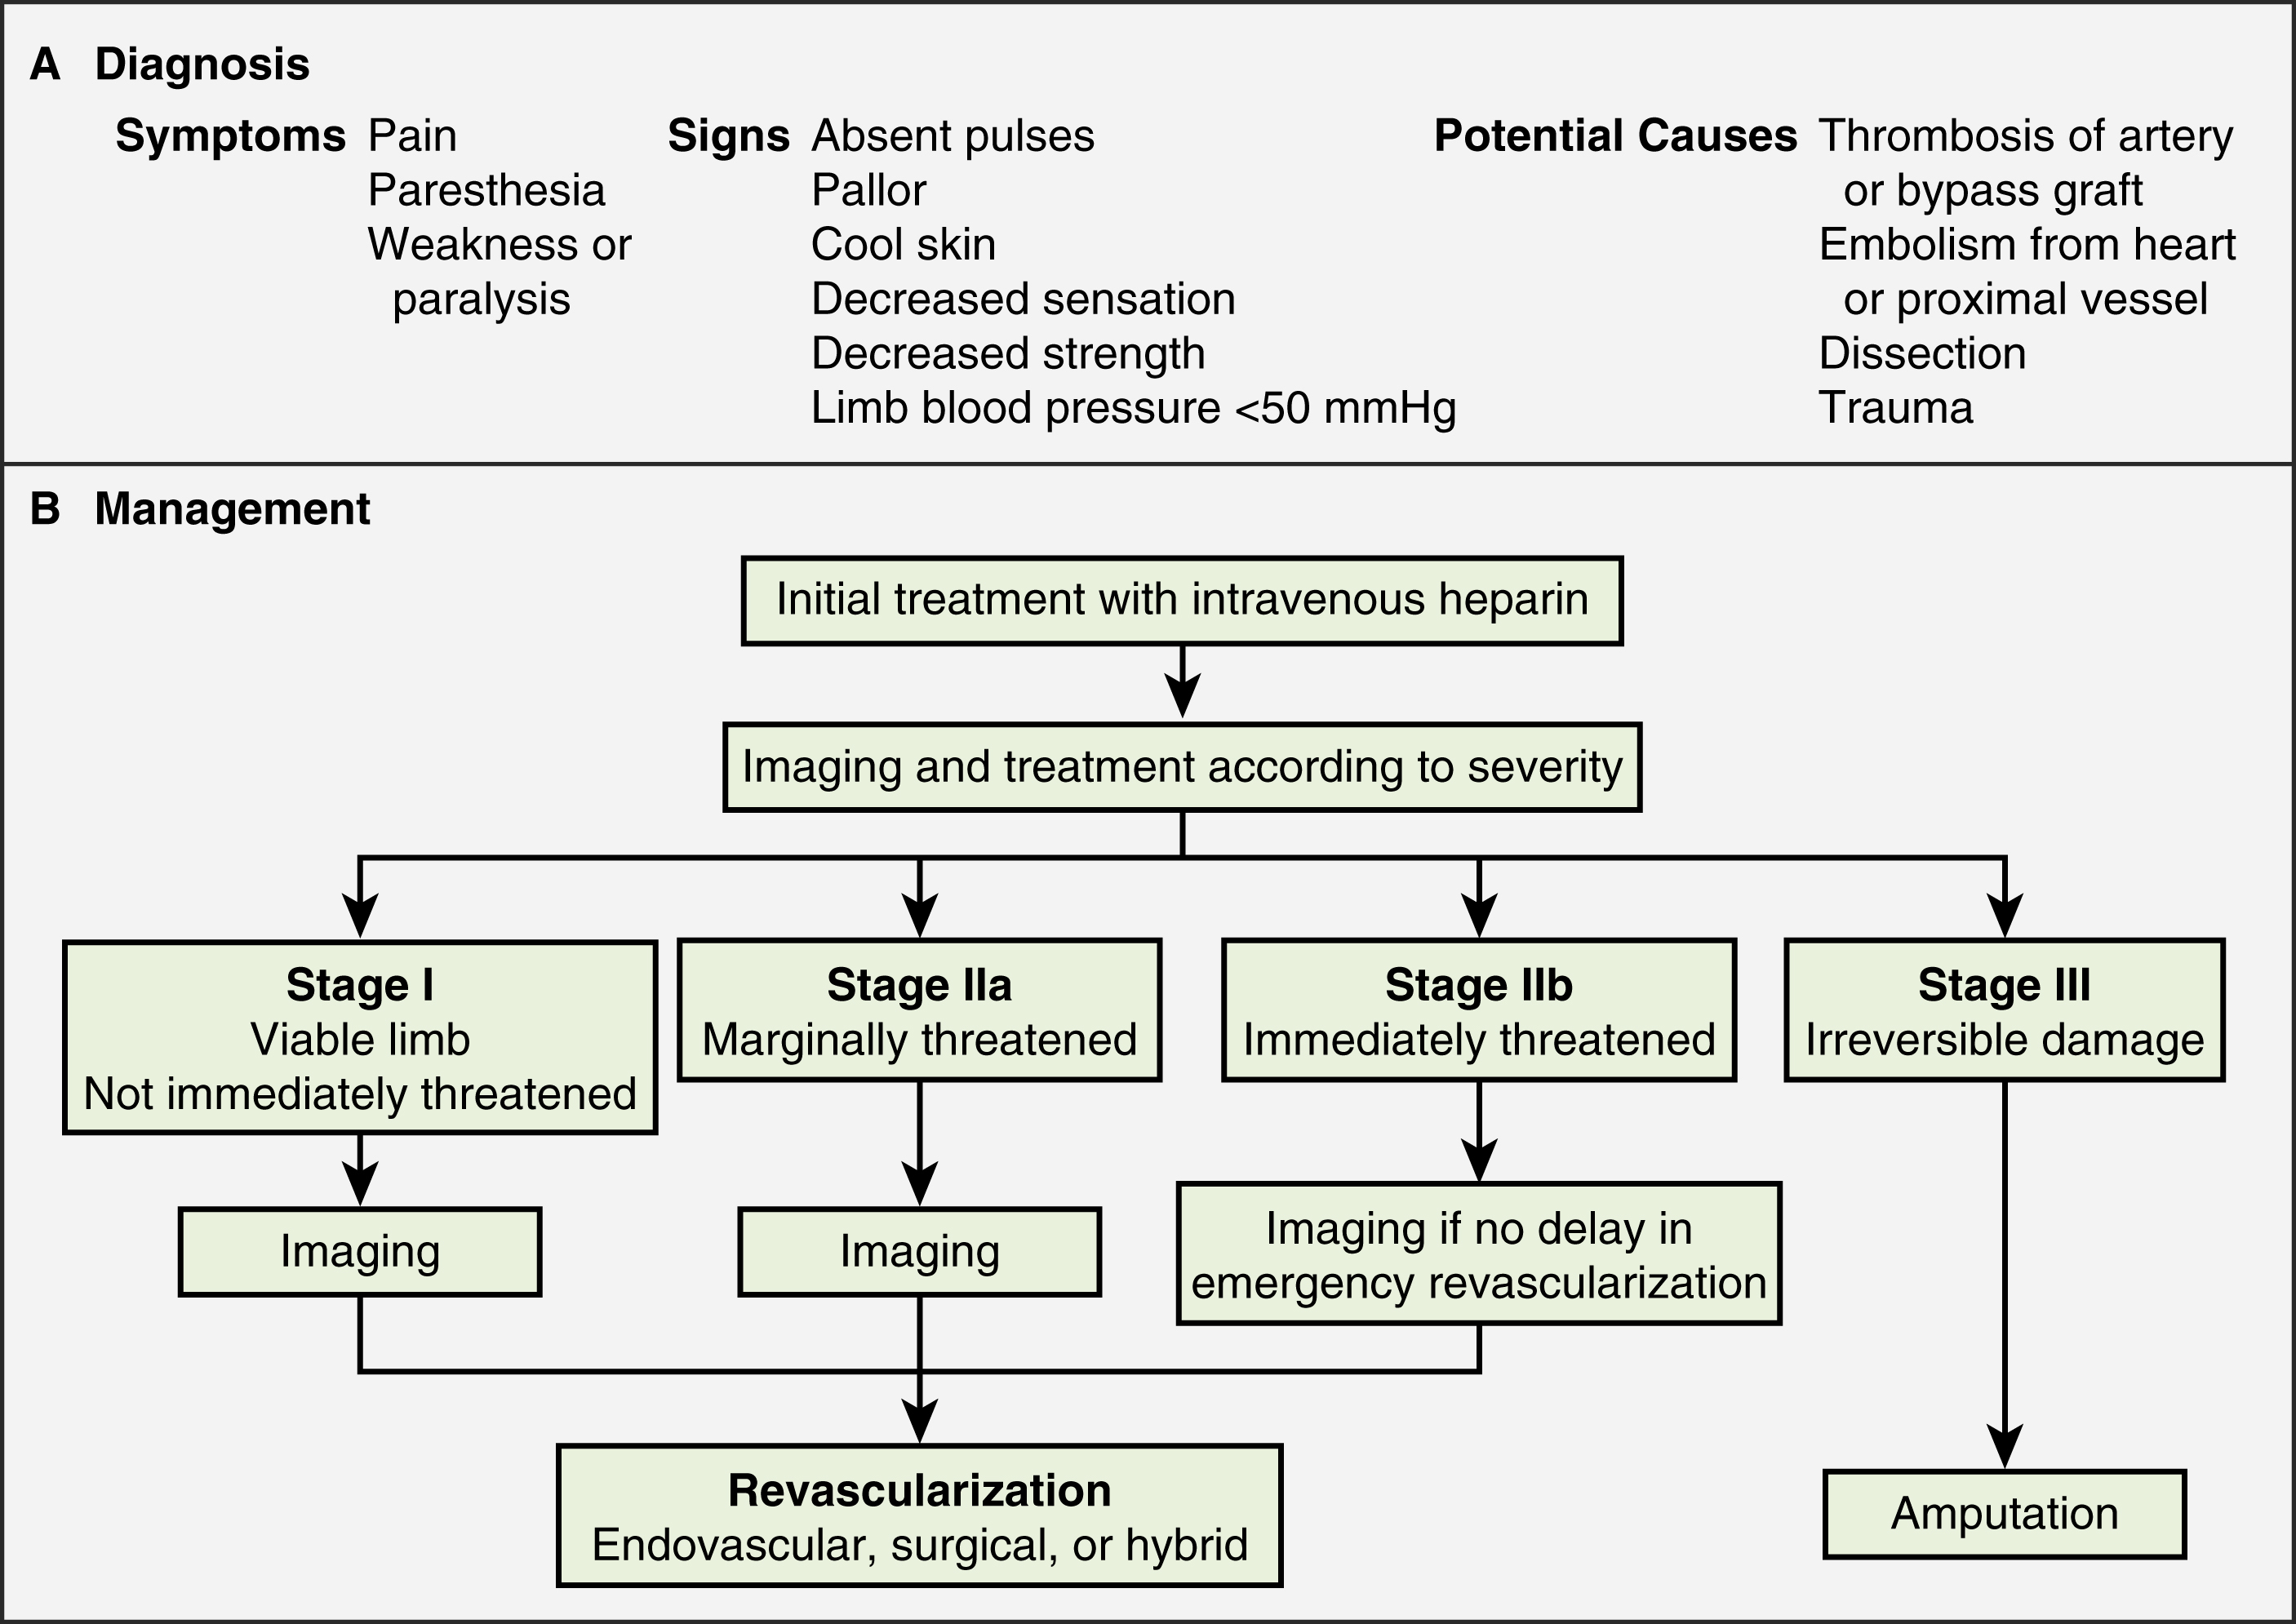 Fig. 11.1, Clinical algorithm for management of acute lower extremity ischemia.